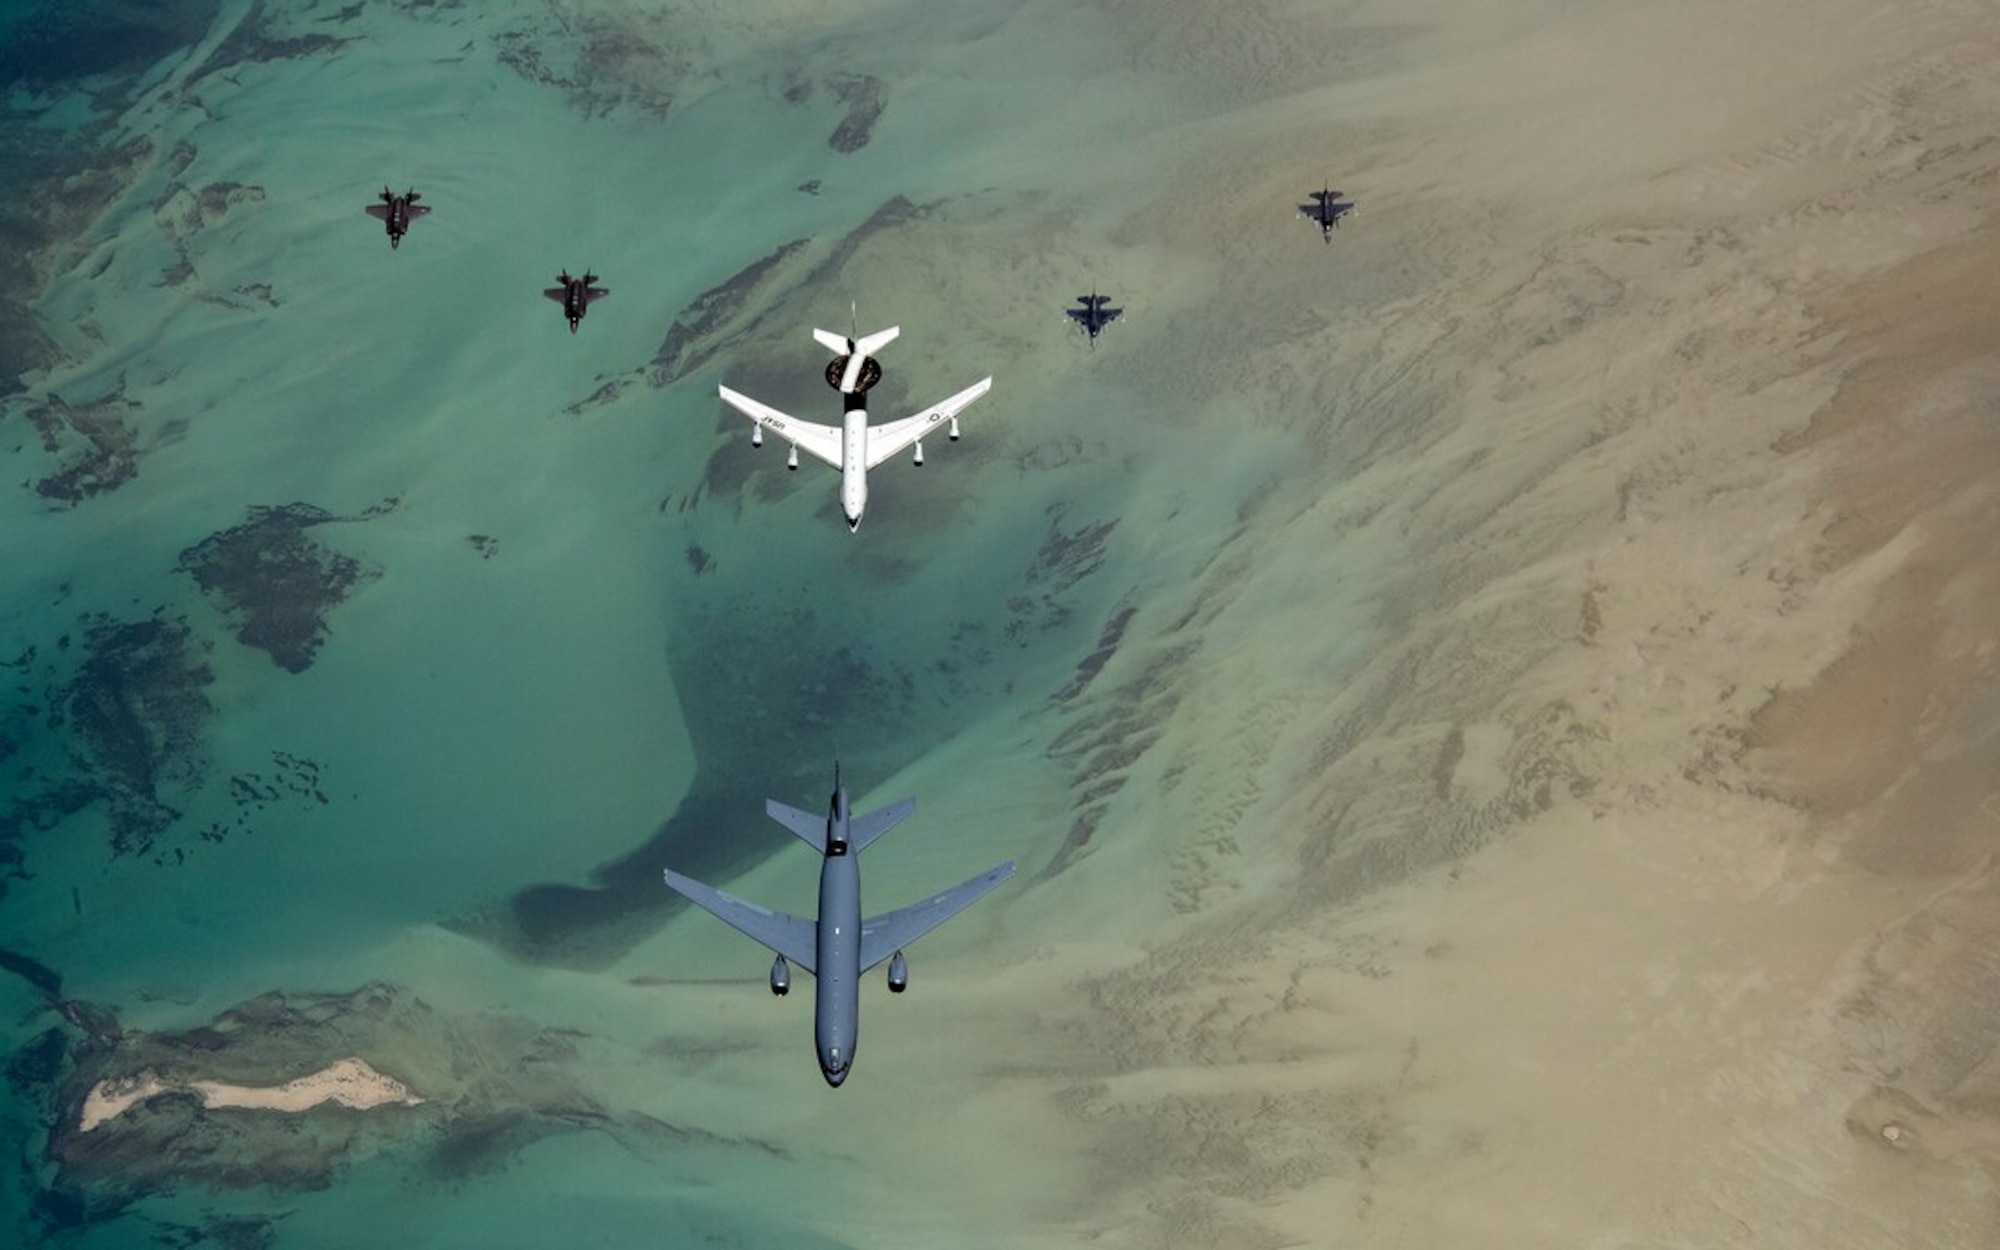 A photo of jets flying in formation.